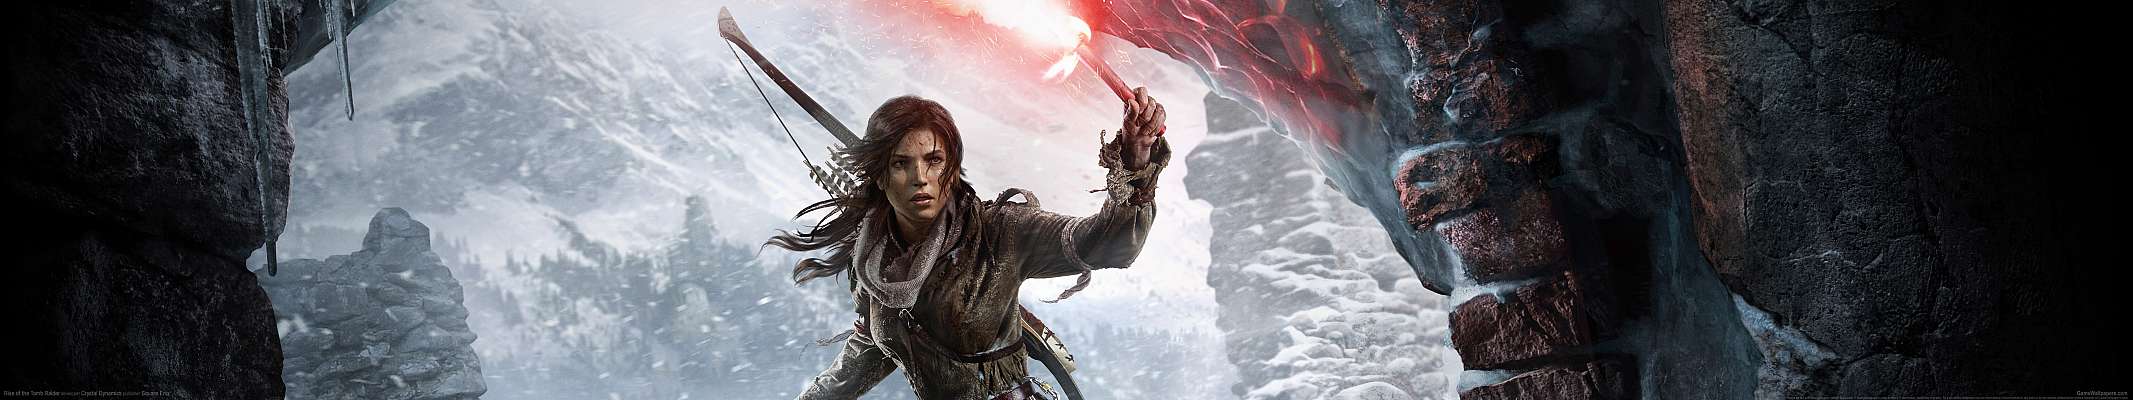 Rise of the Tomb Raider triple screen wallpaper or background